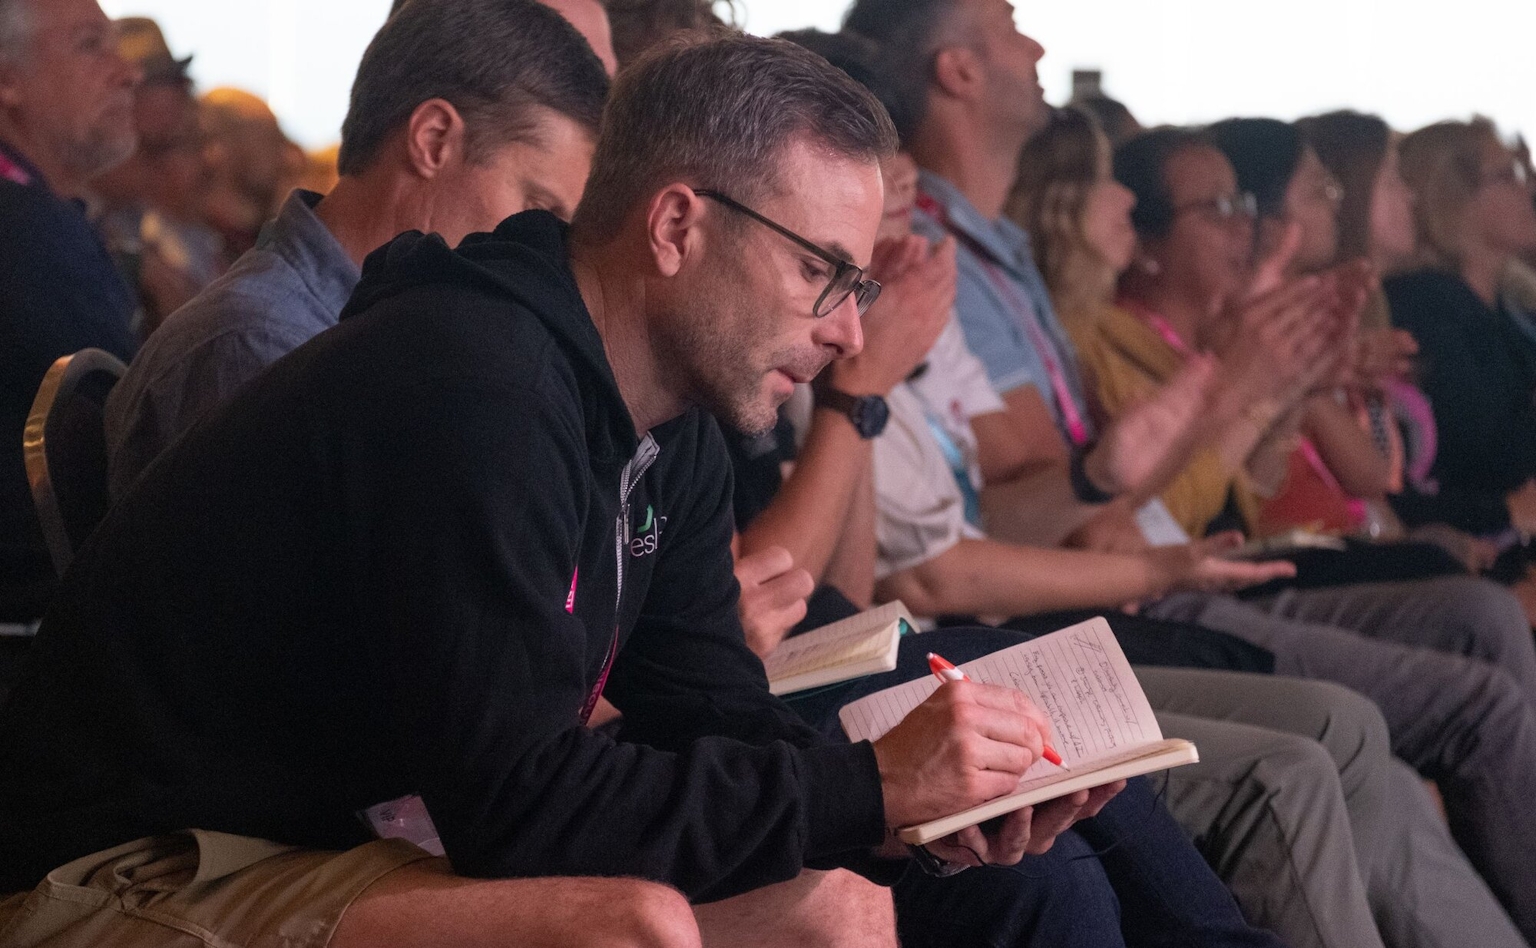 A person in a crowd taking notes in a notebook.